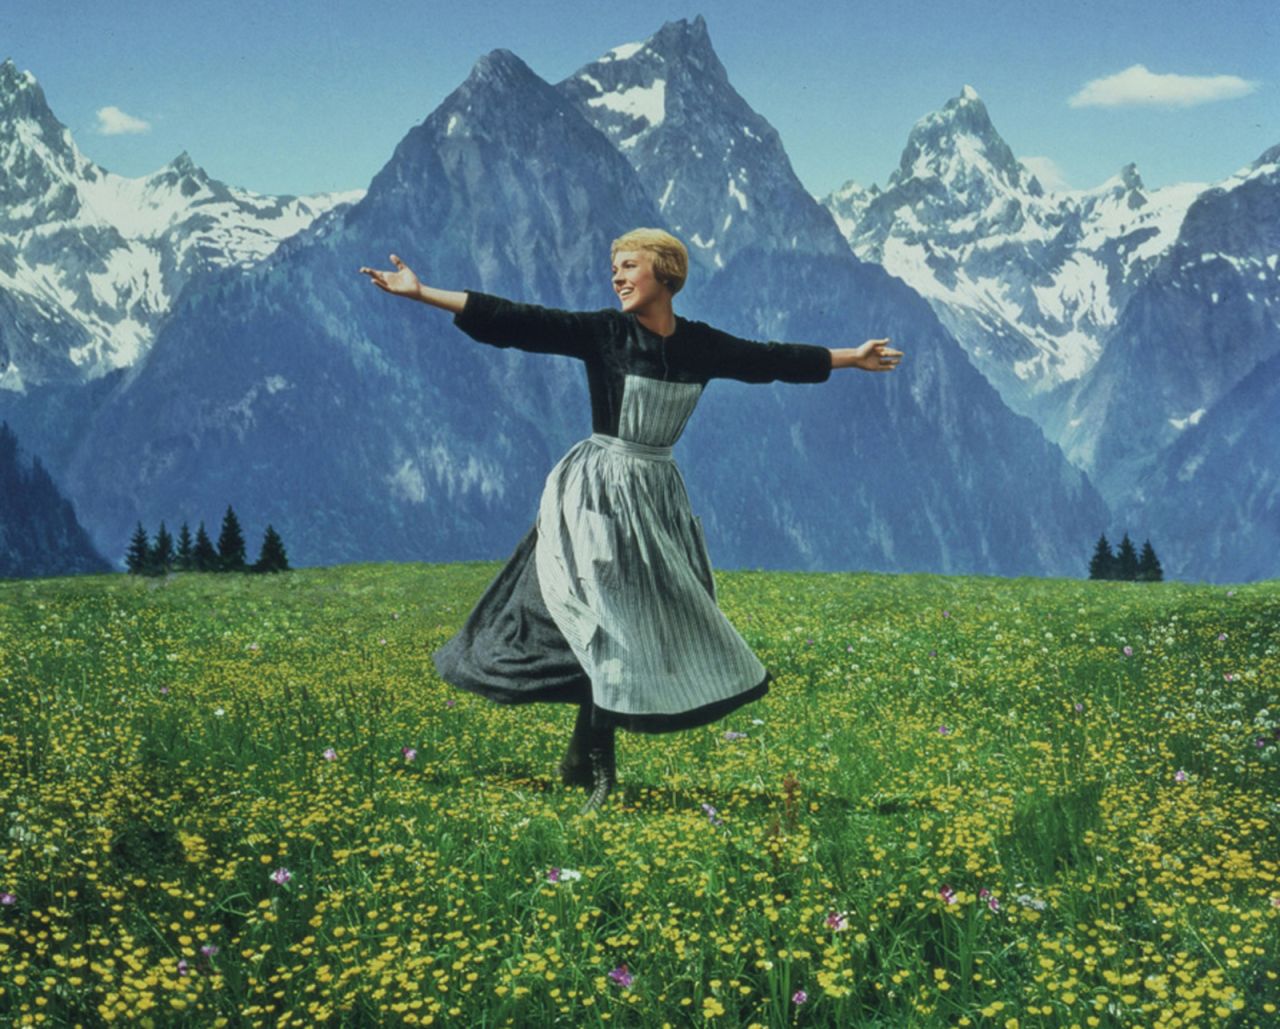 <strong>"The Sound of Music" (1966):</strong> Forget the <a href="http://www.cnn.com/2013/12/06/showbiz/tv/sound-of-music-live-nbc/">recent live broadcast of the Richard Rodgers and Oscar Hammerstein musical</a> on NBC with Carrie Underwood. For many movie fans, Julie Andrews remains the one and only Maria, governess to the von Trapp children in Austria on the eve of World War II. Marni Nixon, who dubbed the singing voices of Natalie Wood in "West Side Story," Deborah Kerr in "The King and I" and Audrey Hepburn in "My Fair Lady," had her first on-screen role as a nun. Not only did "The Sound of Music" win best picture, it was also for a time the biggest moneymaker ever.